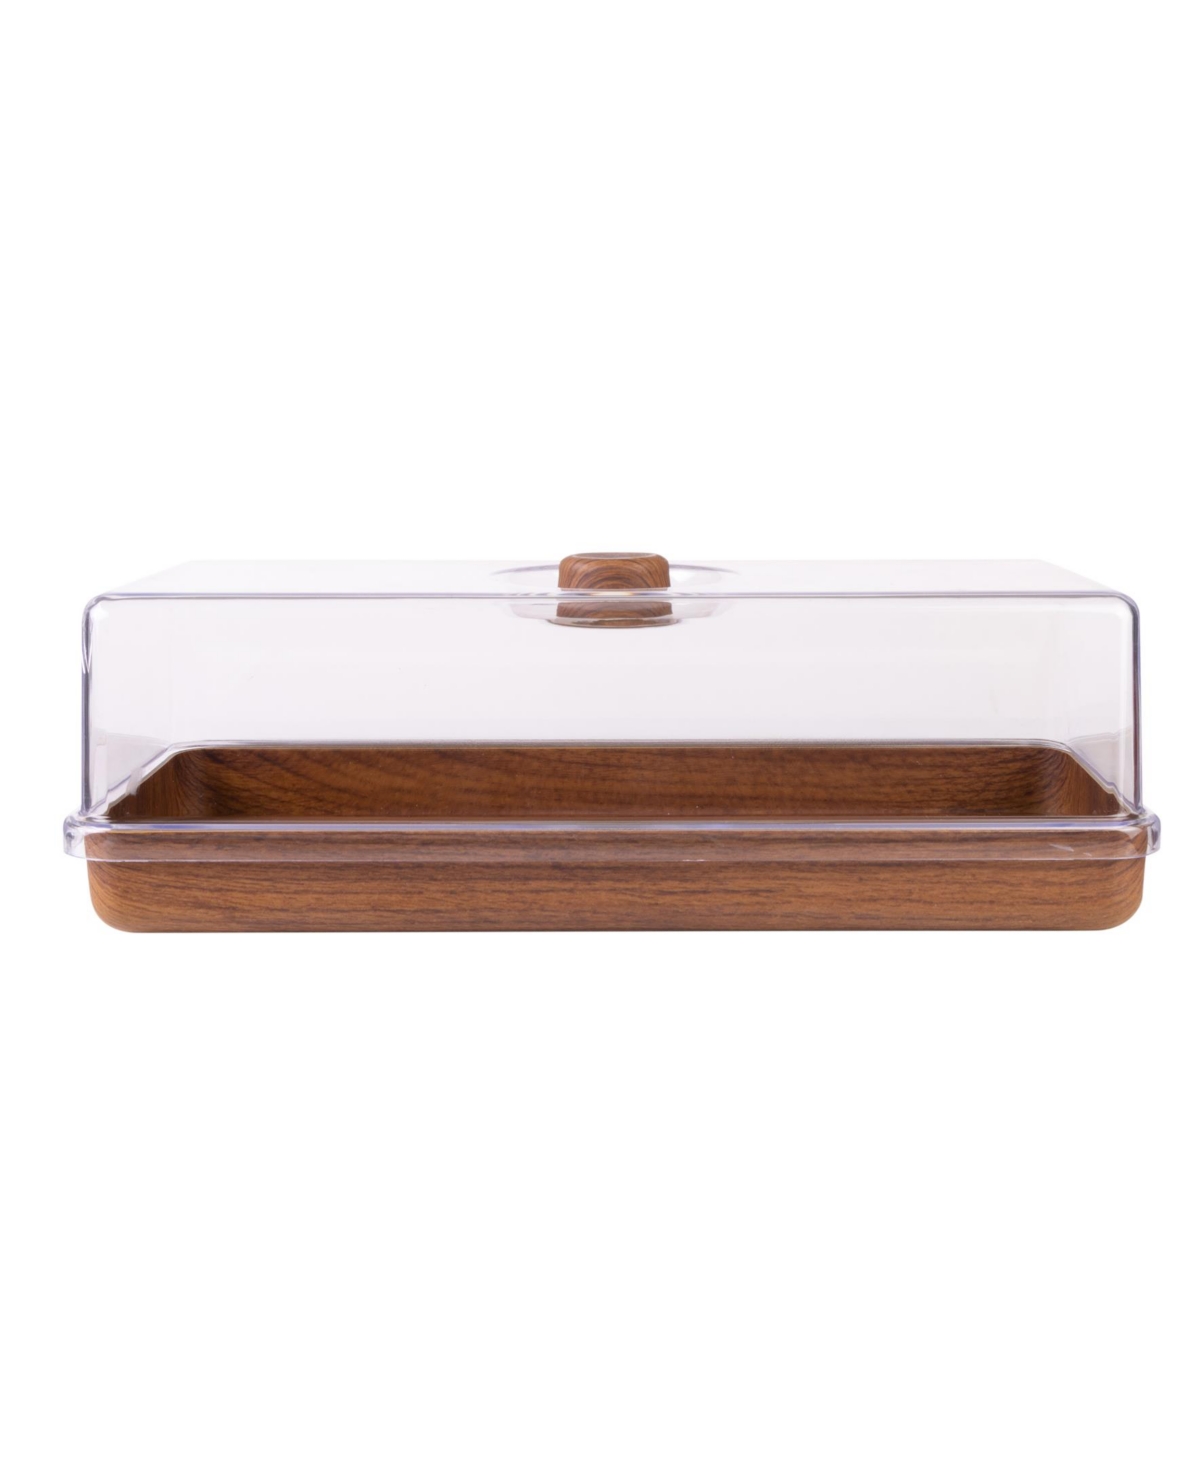 Luxe Party Mahogany Collection Bread and Cake Tray with Cover - Wood